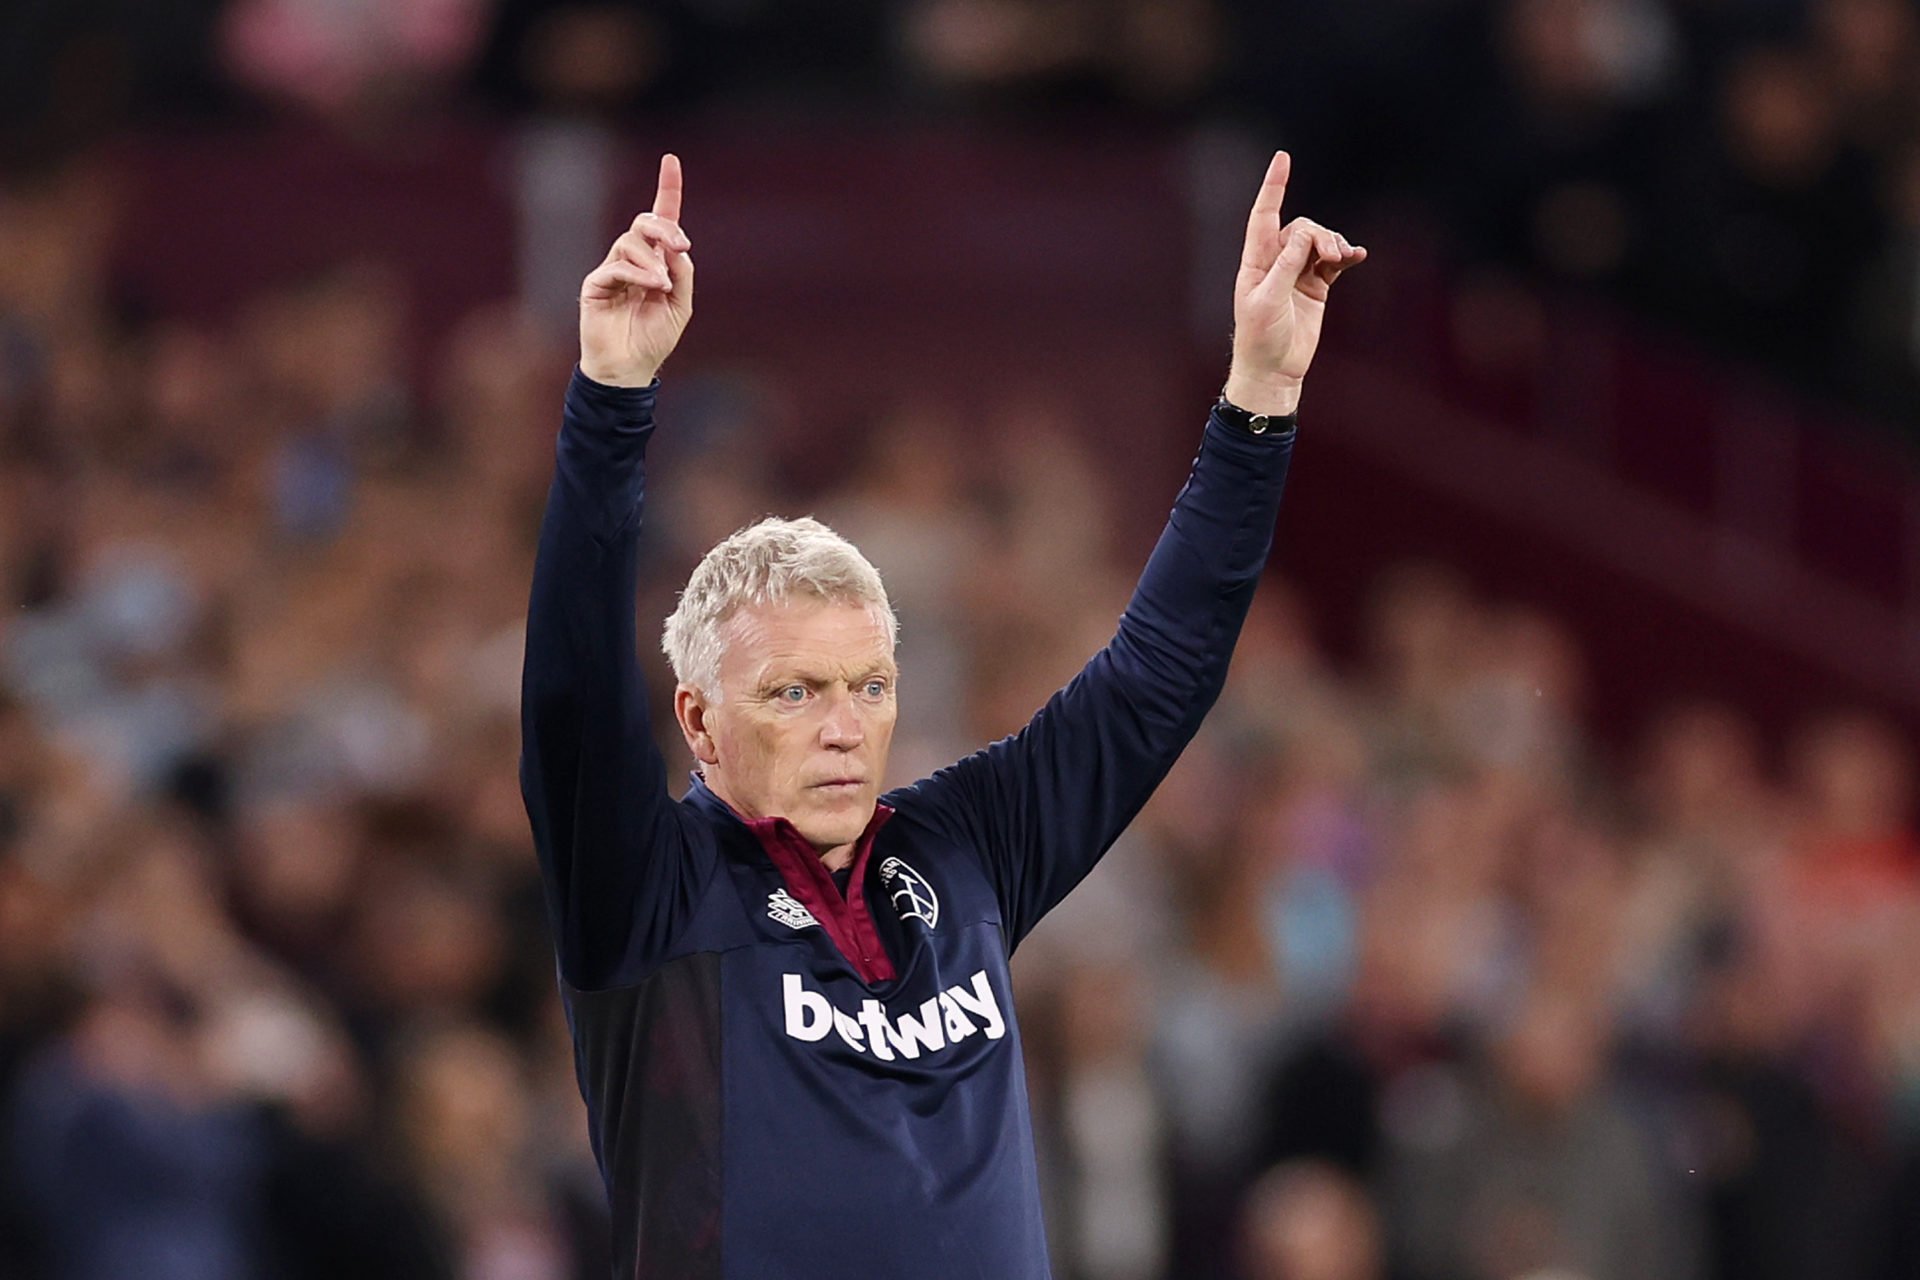 1 West Ham player looked exceptional vs Perth as Moyes deploys exciting new playing style